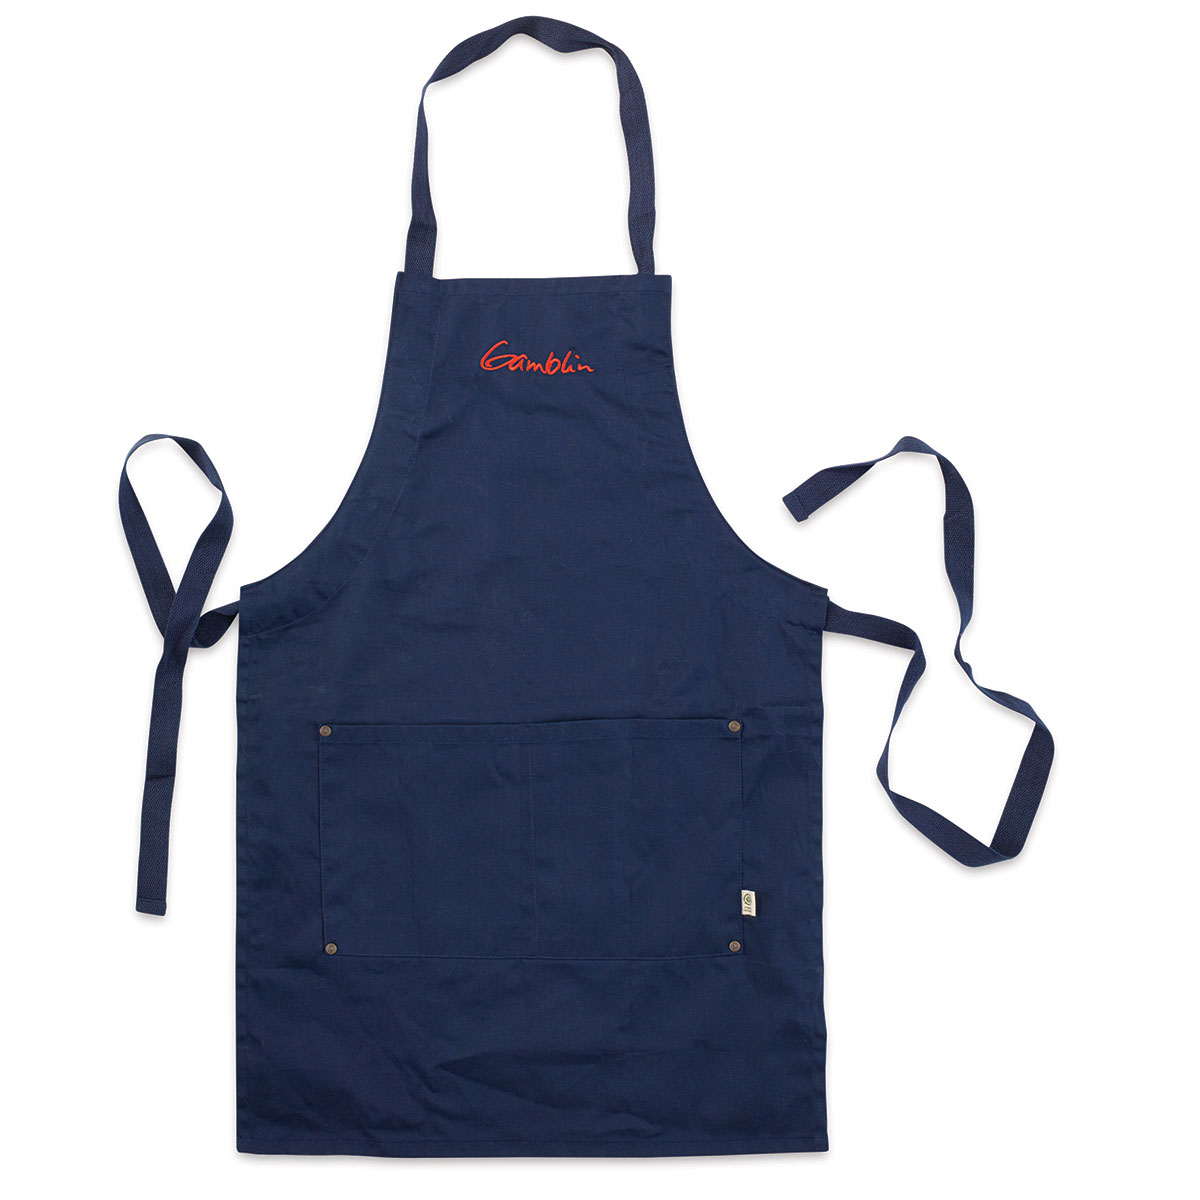 Gamblin Embroidered Artists Apron